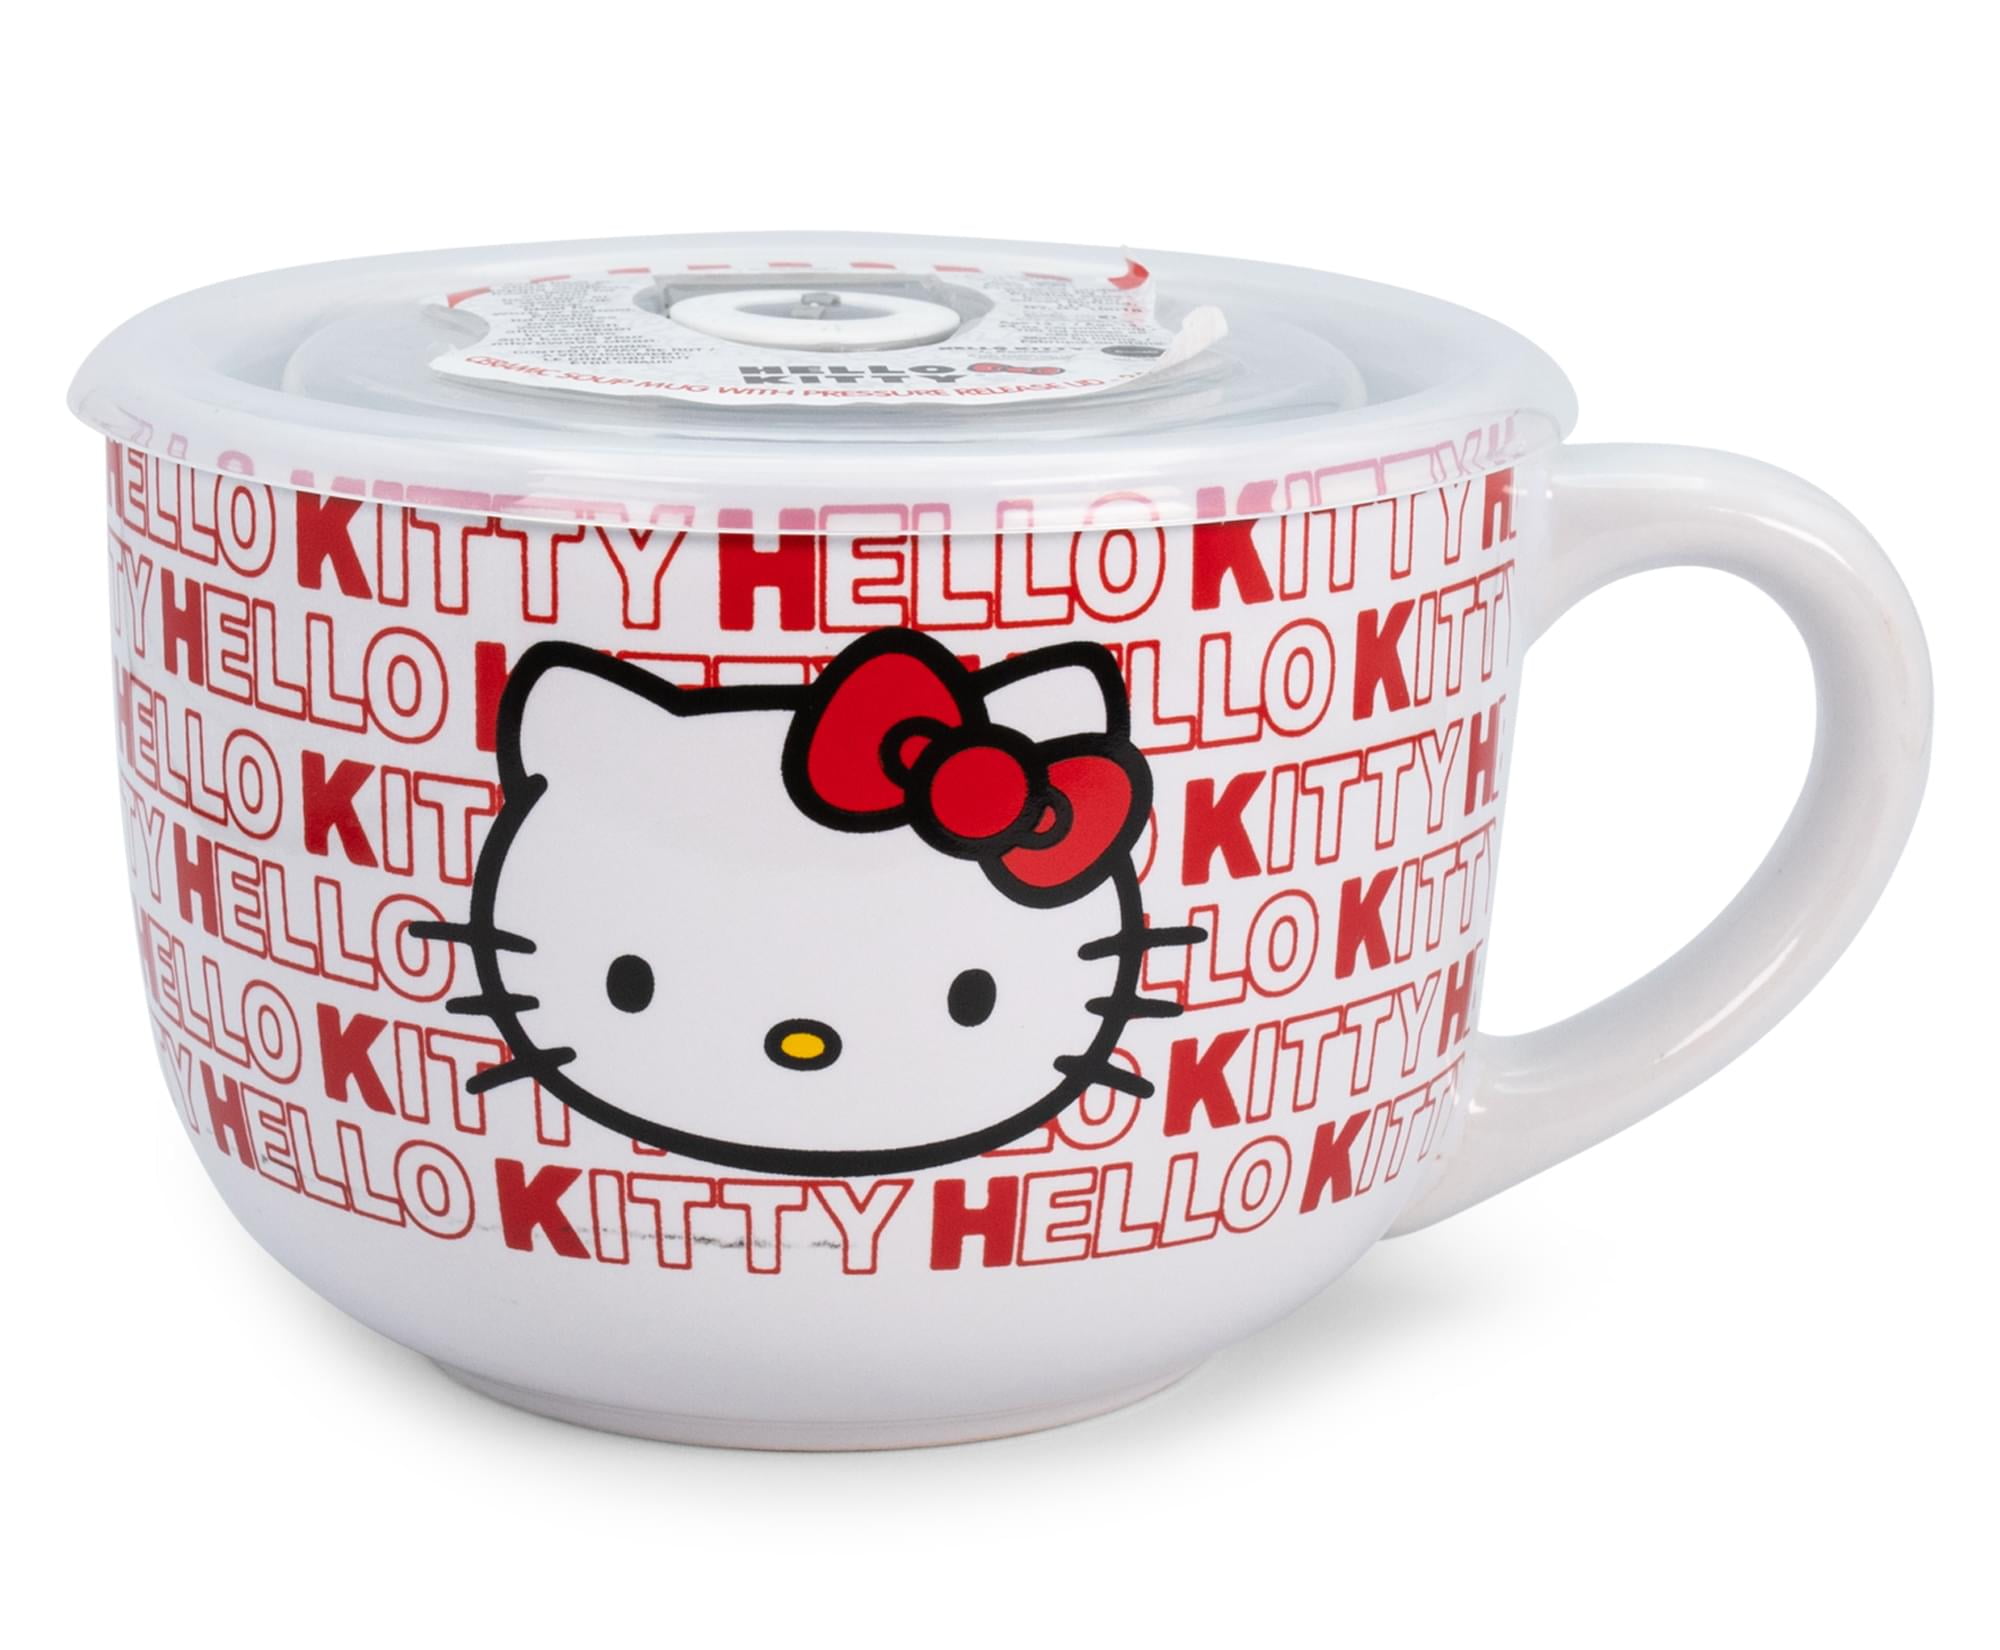 Blue Sanrio Hello Kitty Soup Cup 14 × 4 × 10.5 cm 230ml with handles Microwave OK Dinnerware Saucers Kitchen